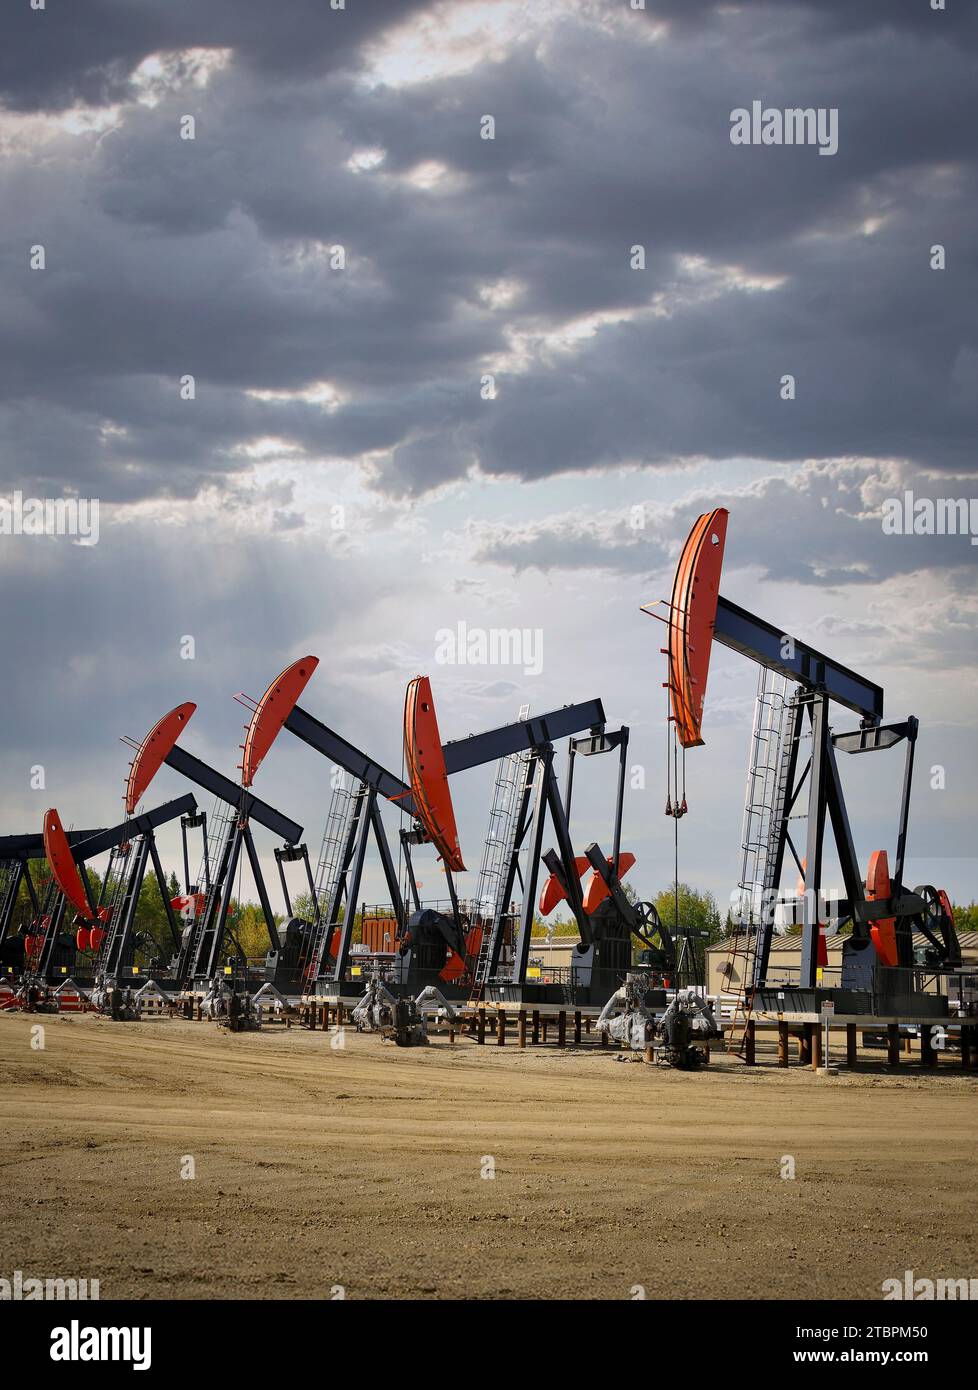 The pump jacks work in an industrial setting to extract natural oil from the ground Stock Photo